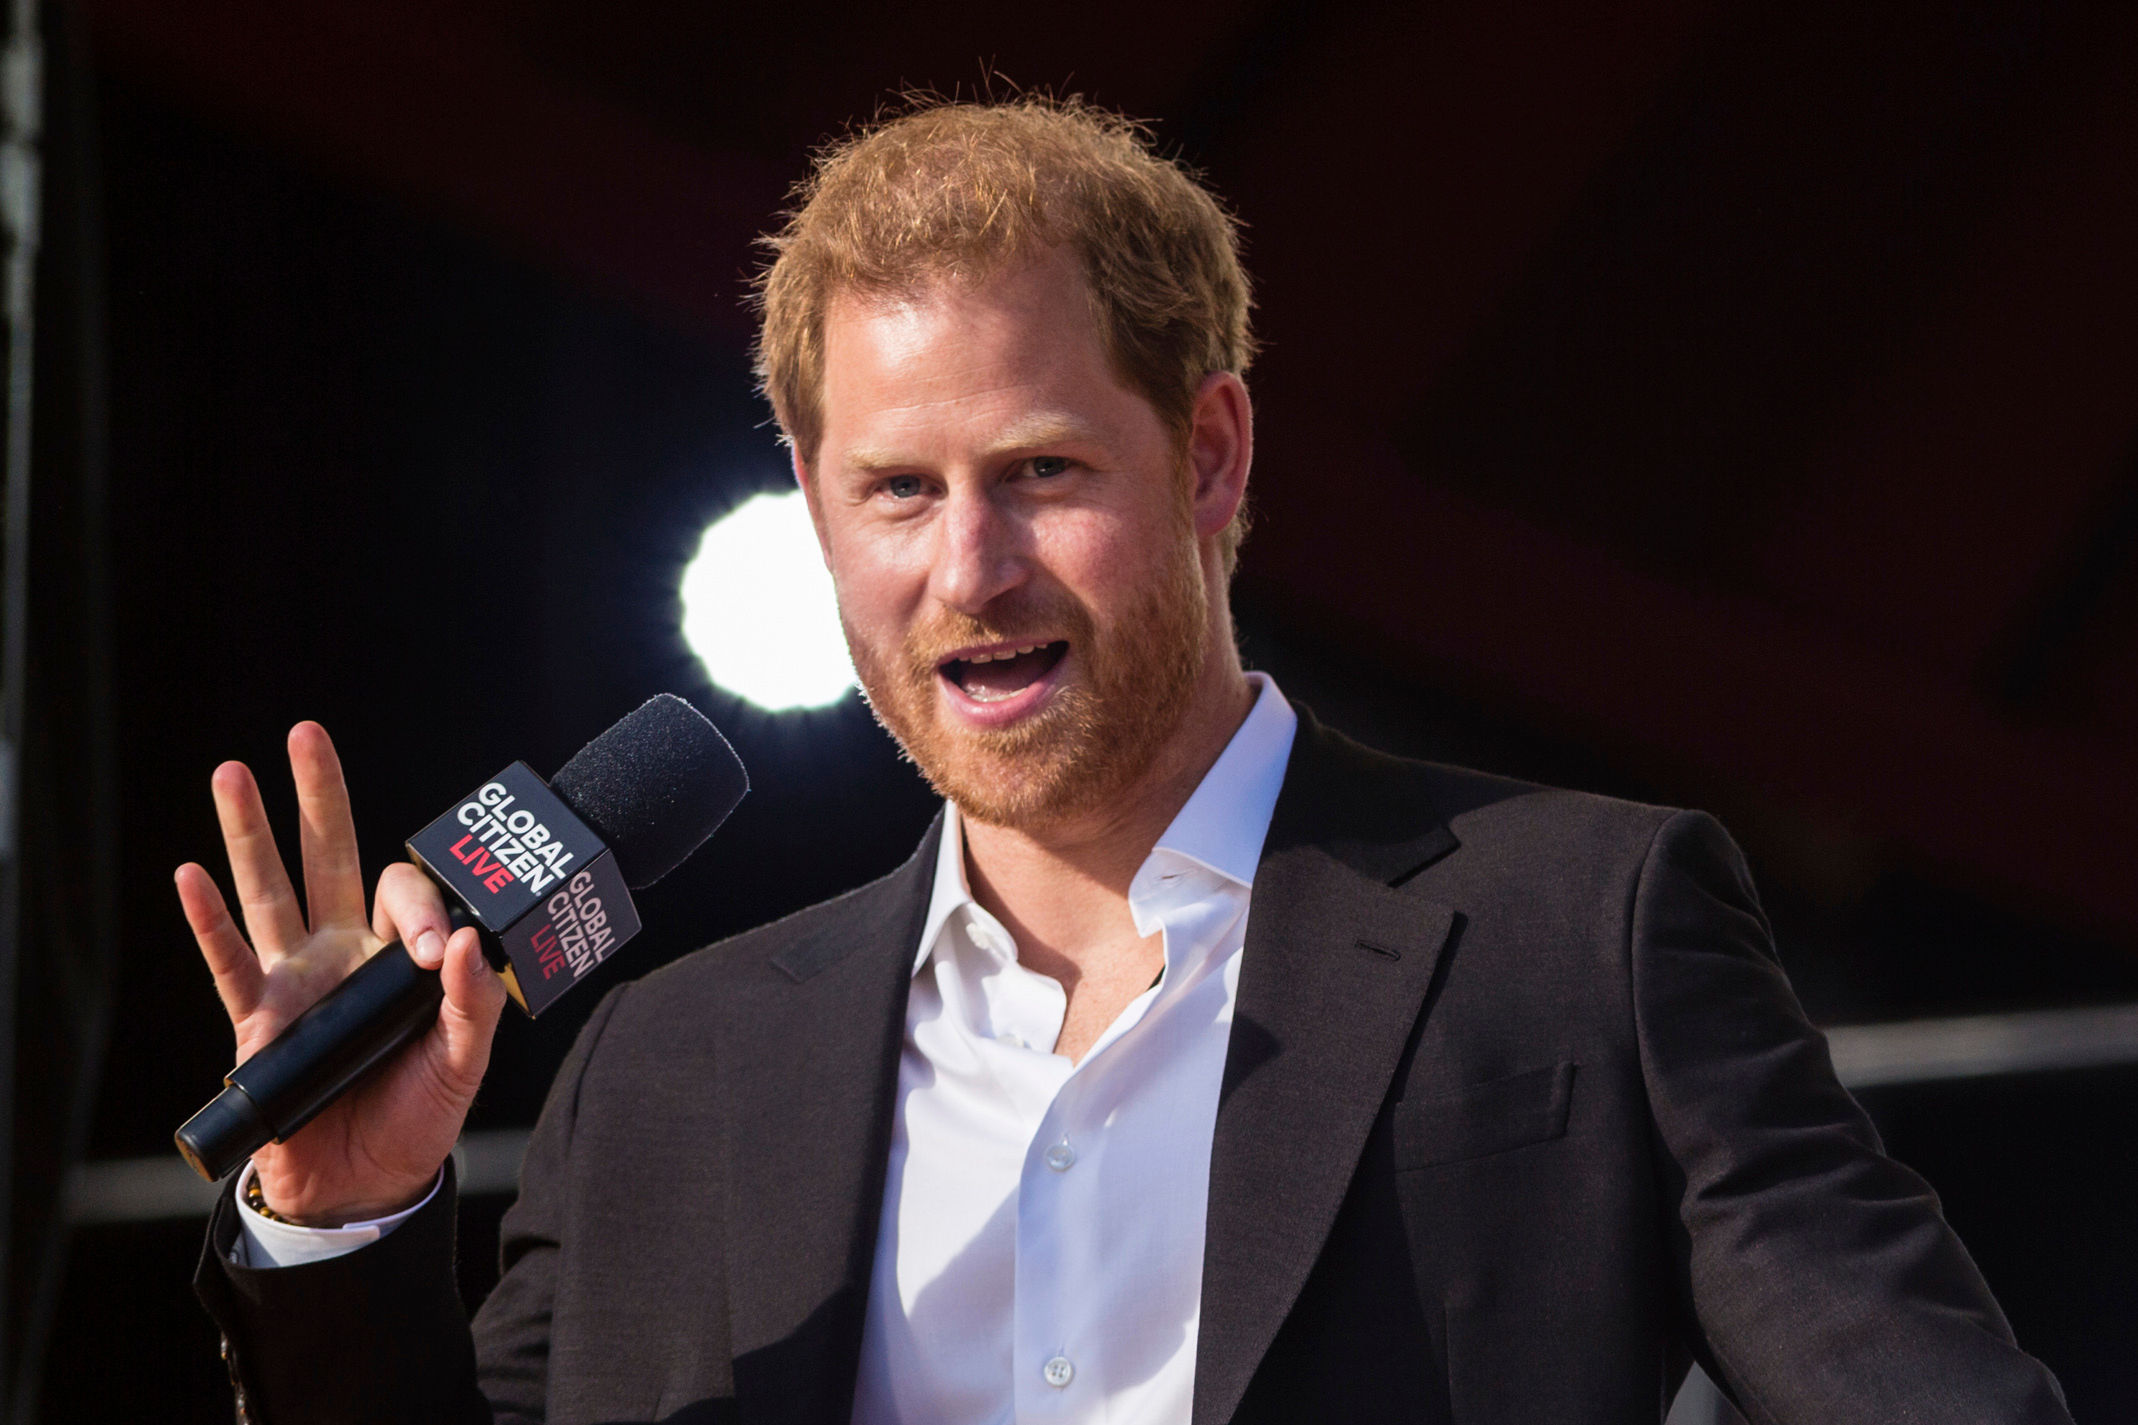 Prince Harry pledges global unity with Ukraine at Invictus Games